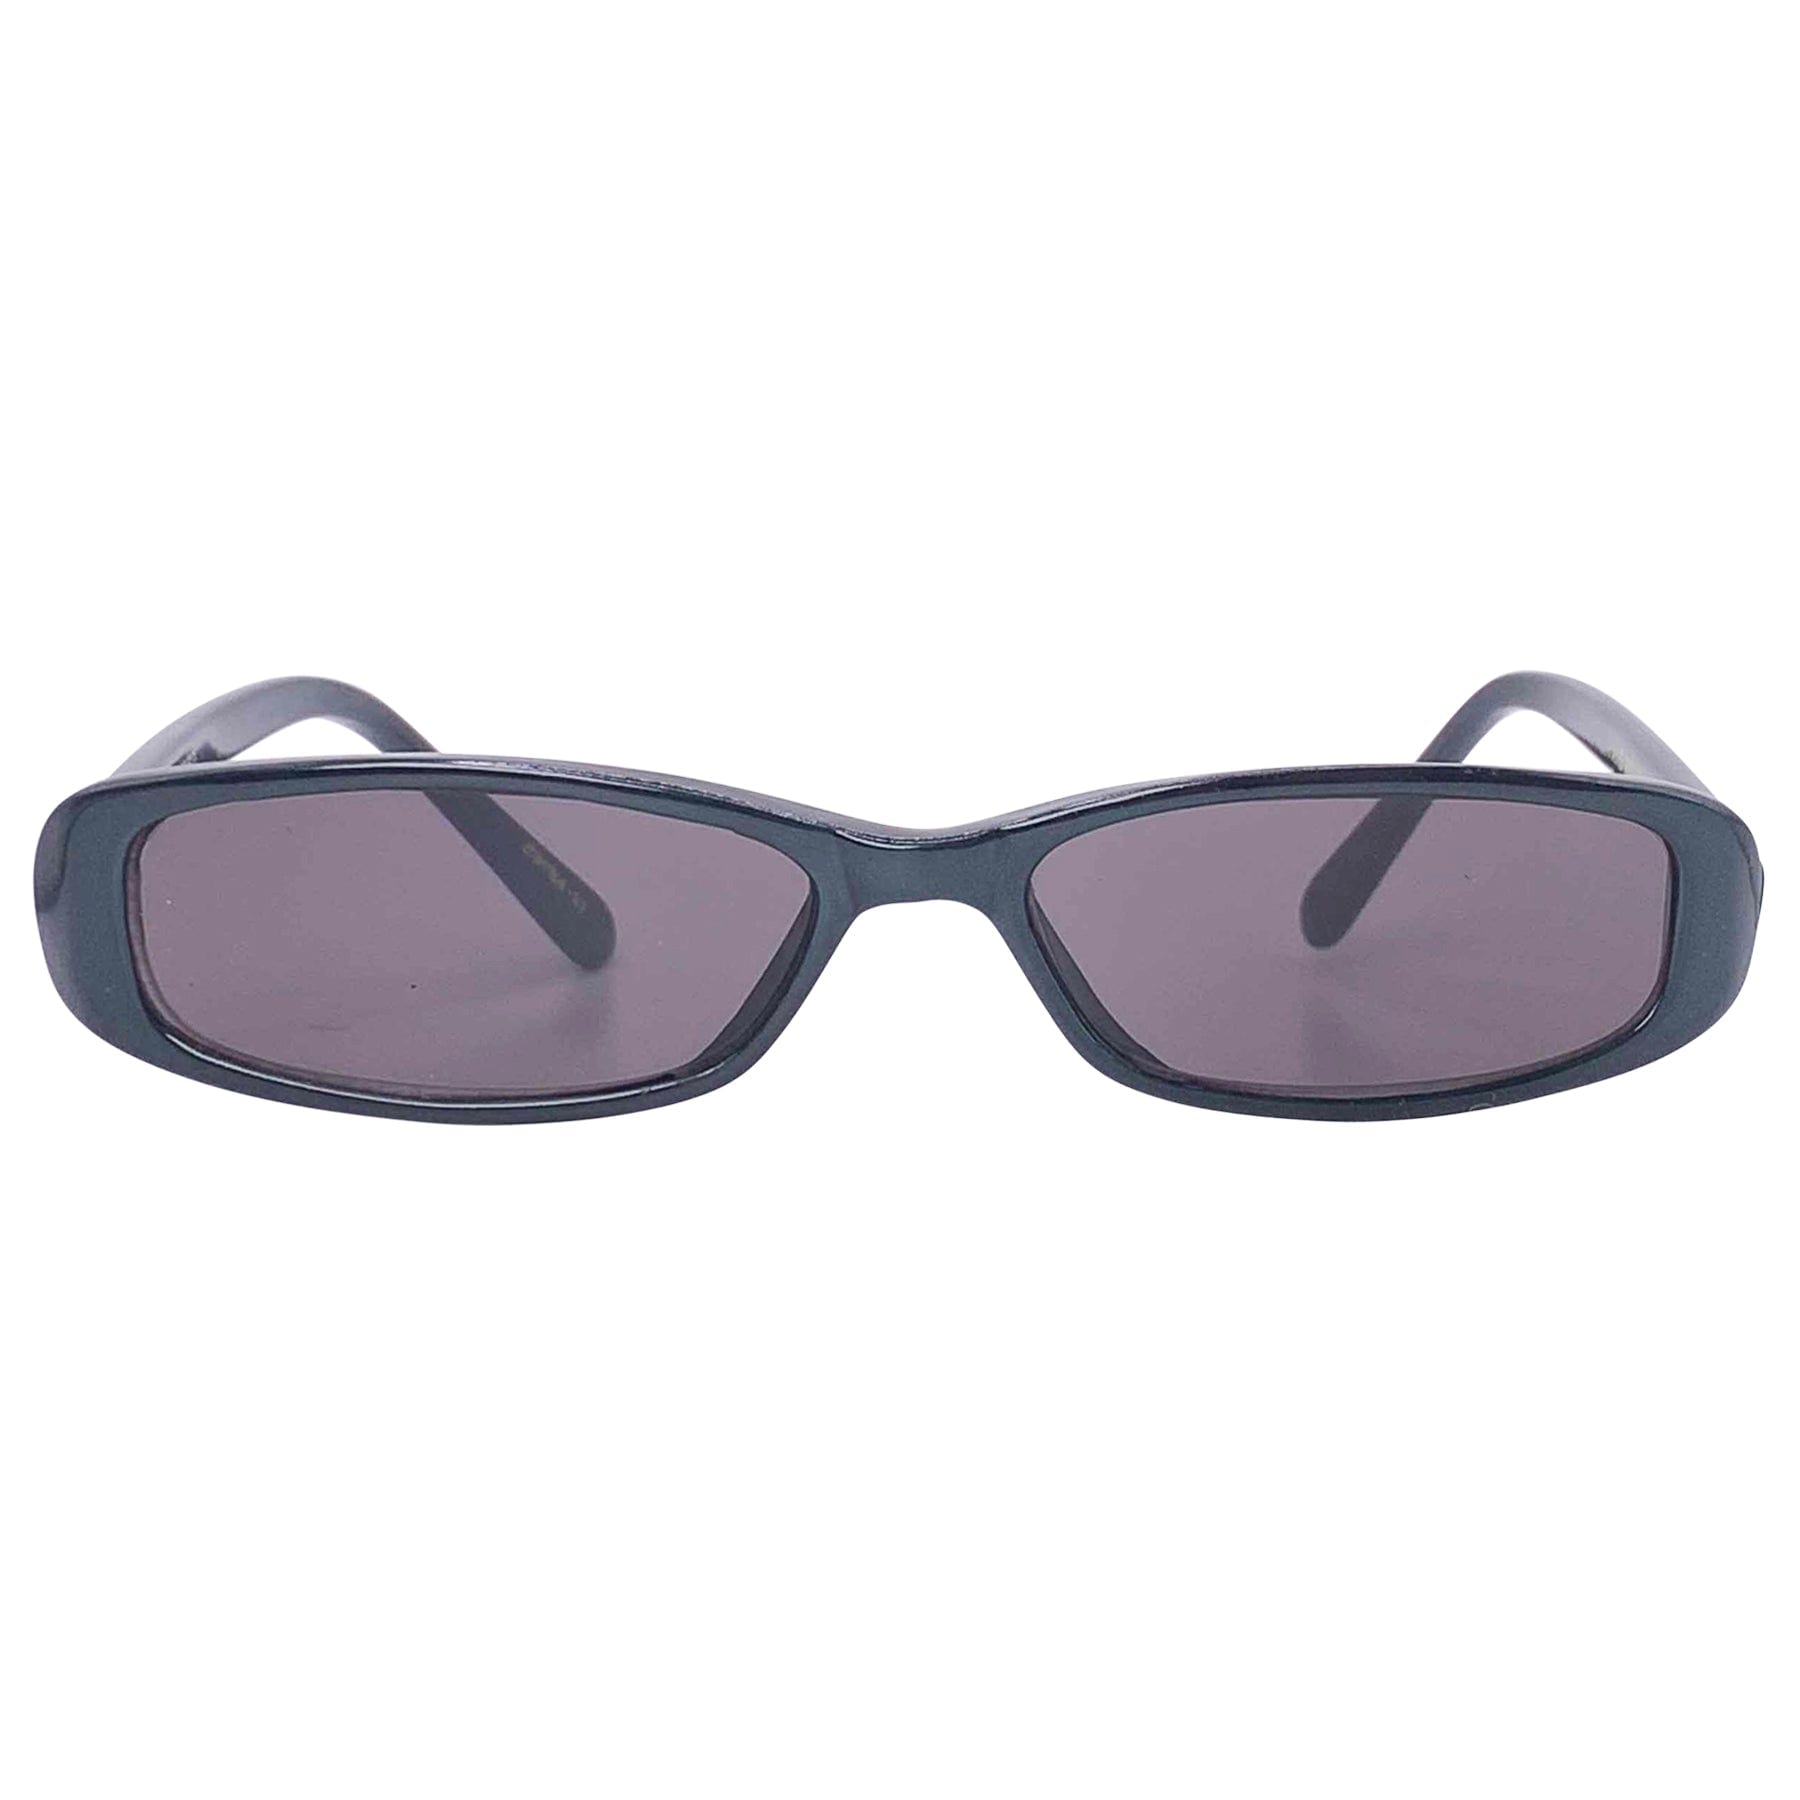 90s vintage look sunglasses with a navy colored frame